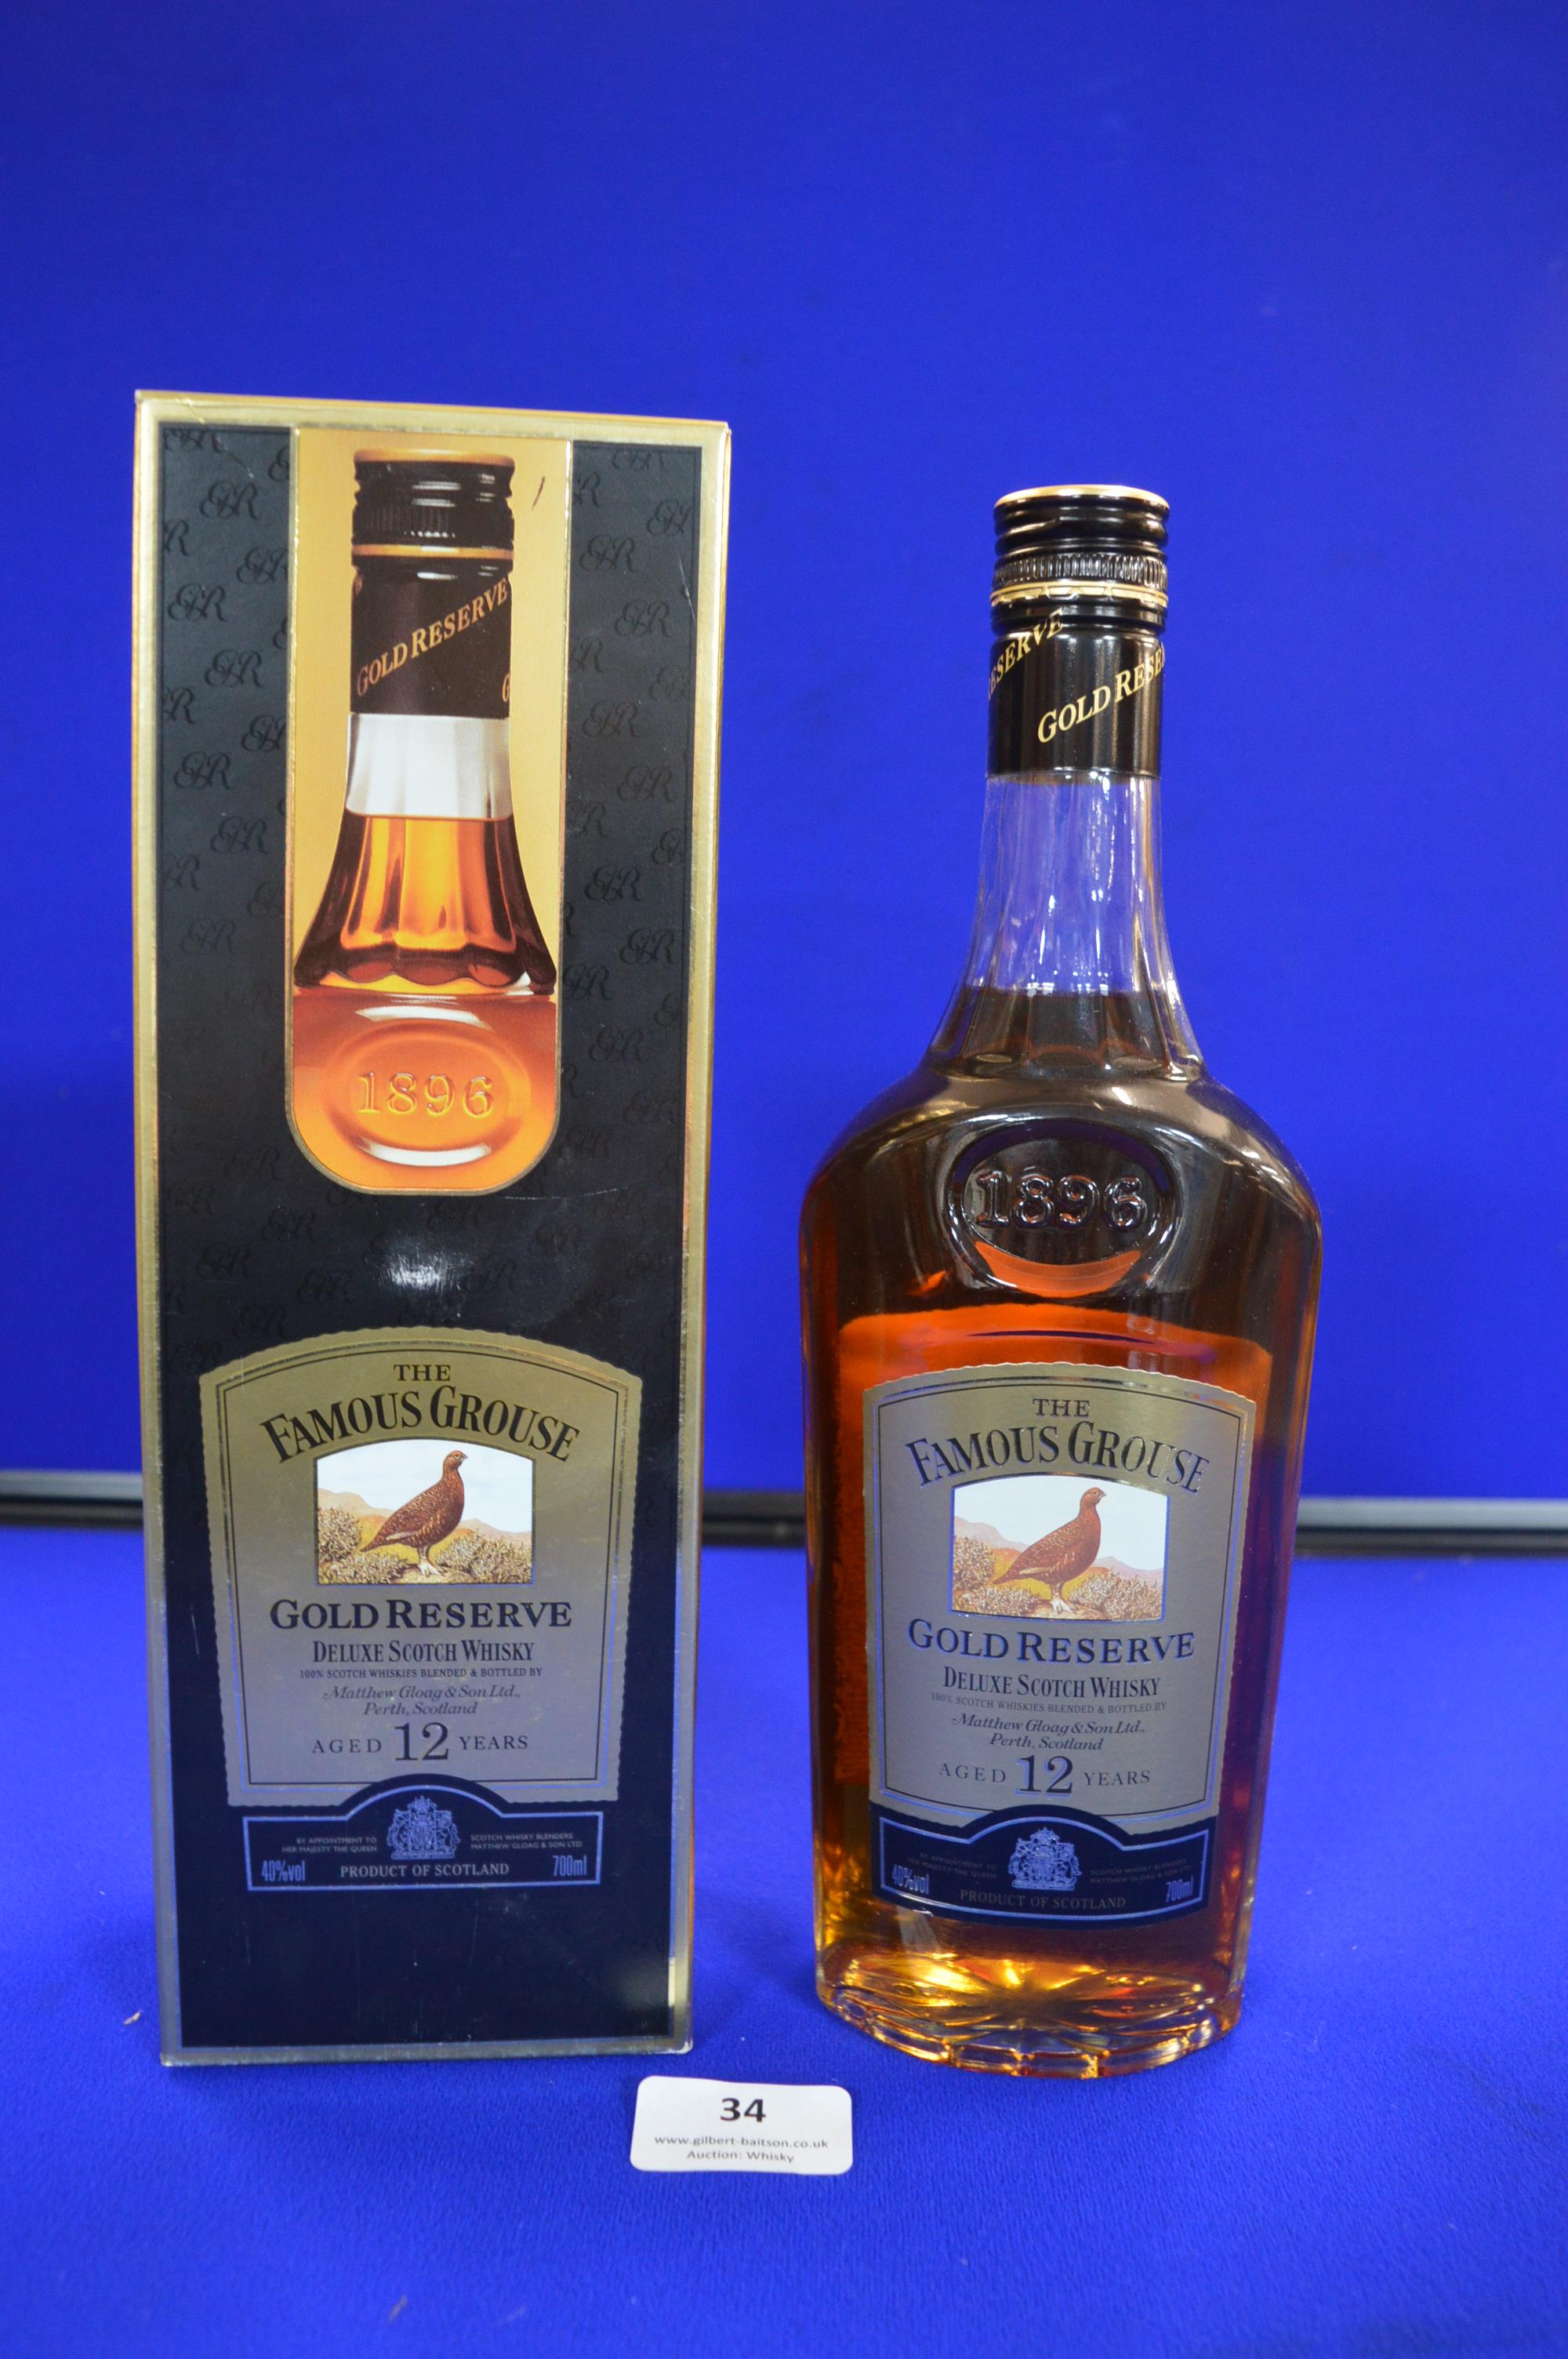 The Famous Grouse Gold Reserve Deluxe 12 Year Old Scotch Whisky